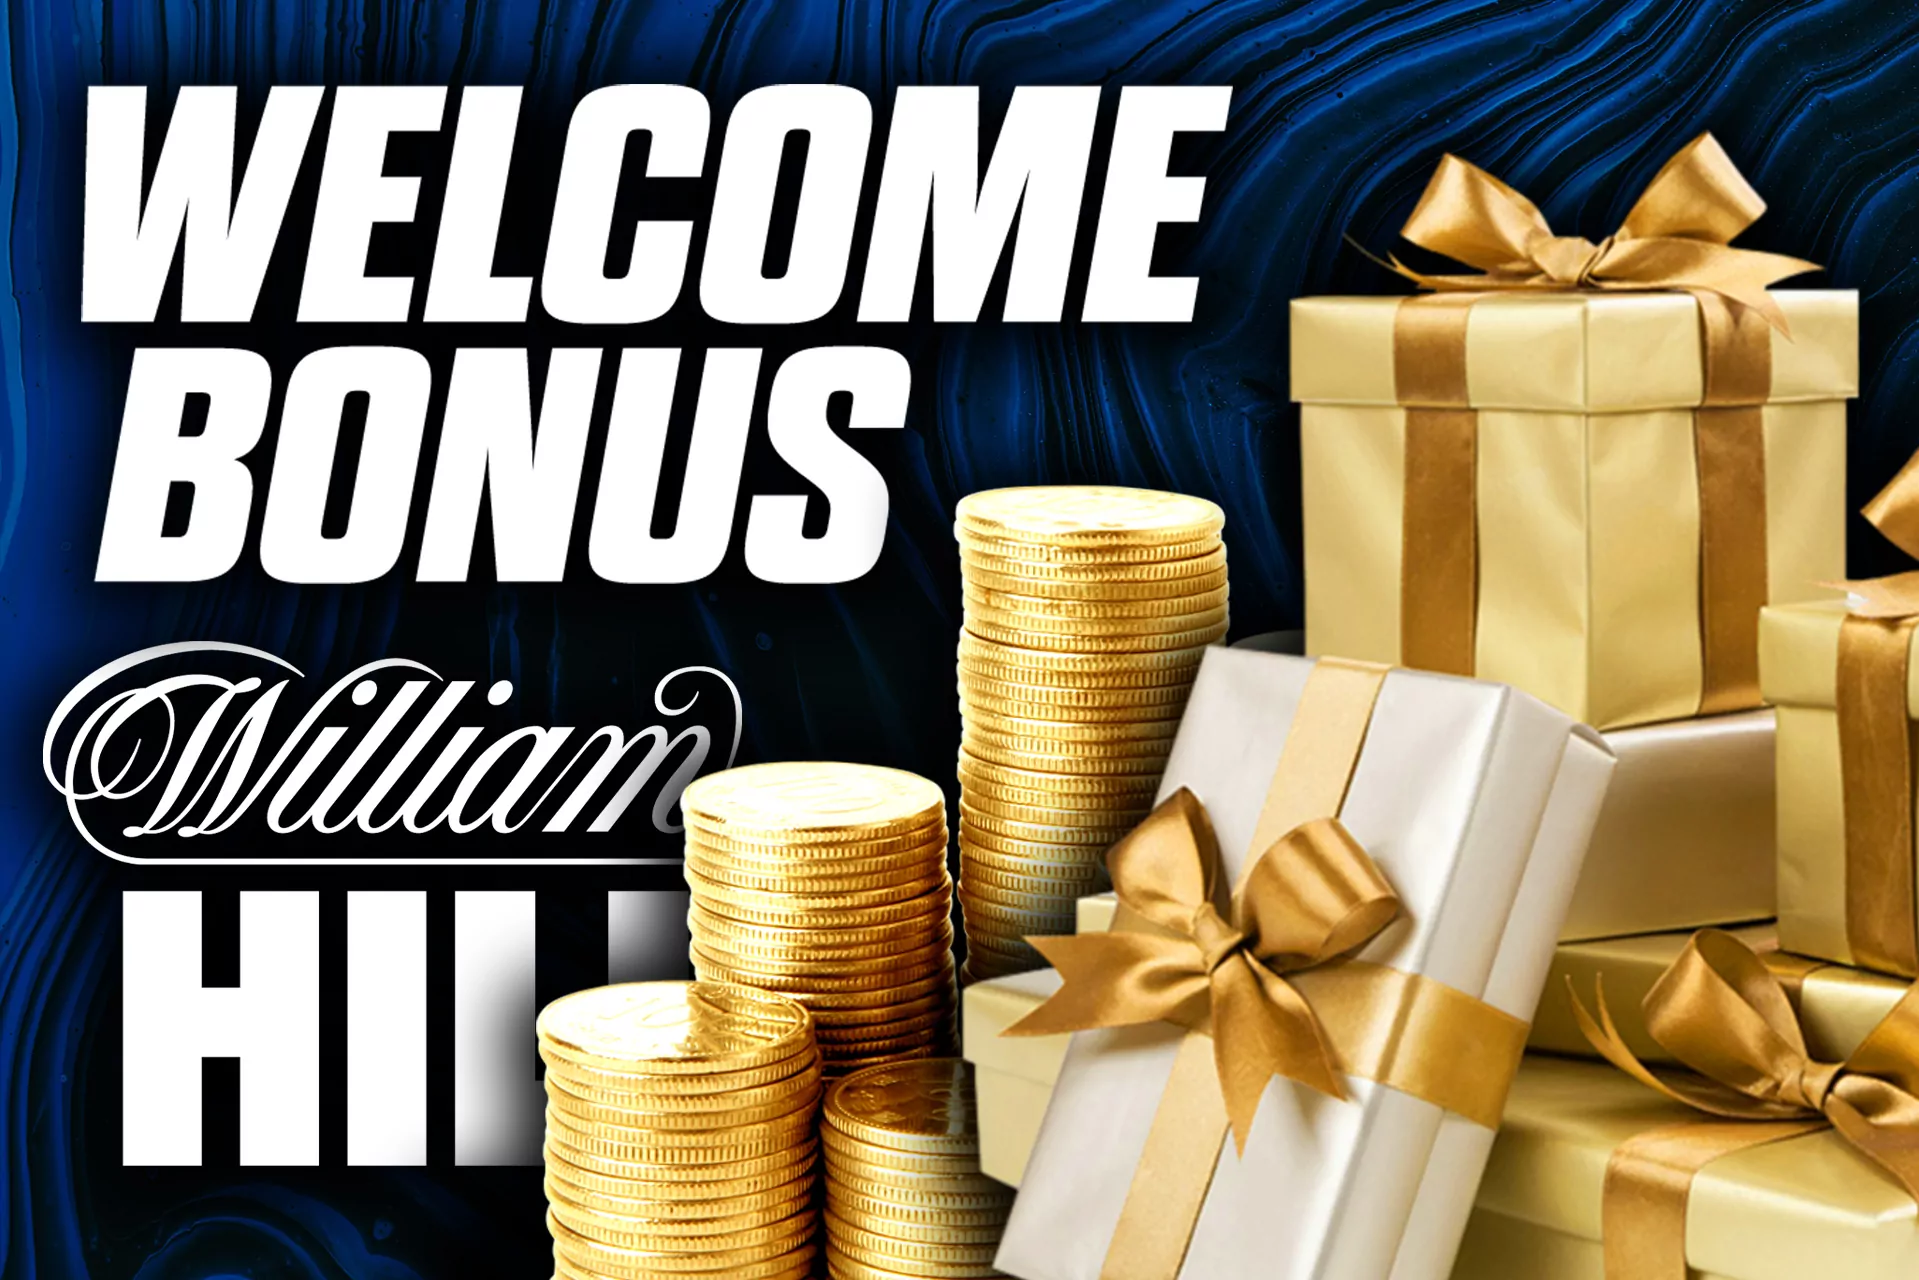 Welcome bonus is a 100% plus to your first deposit.